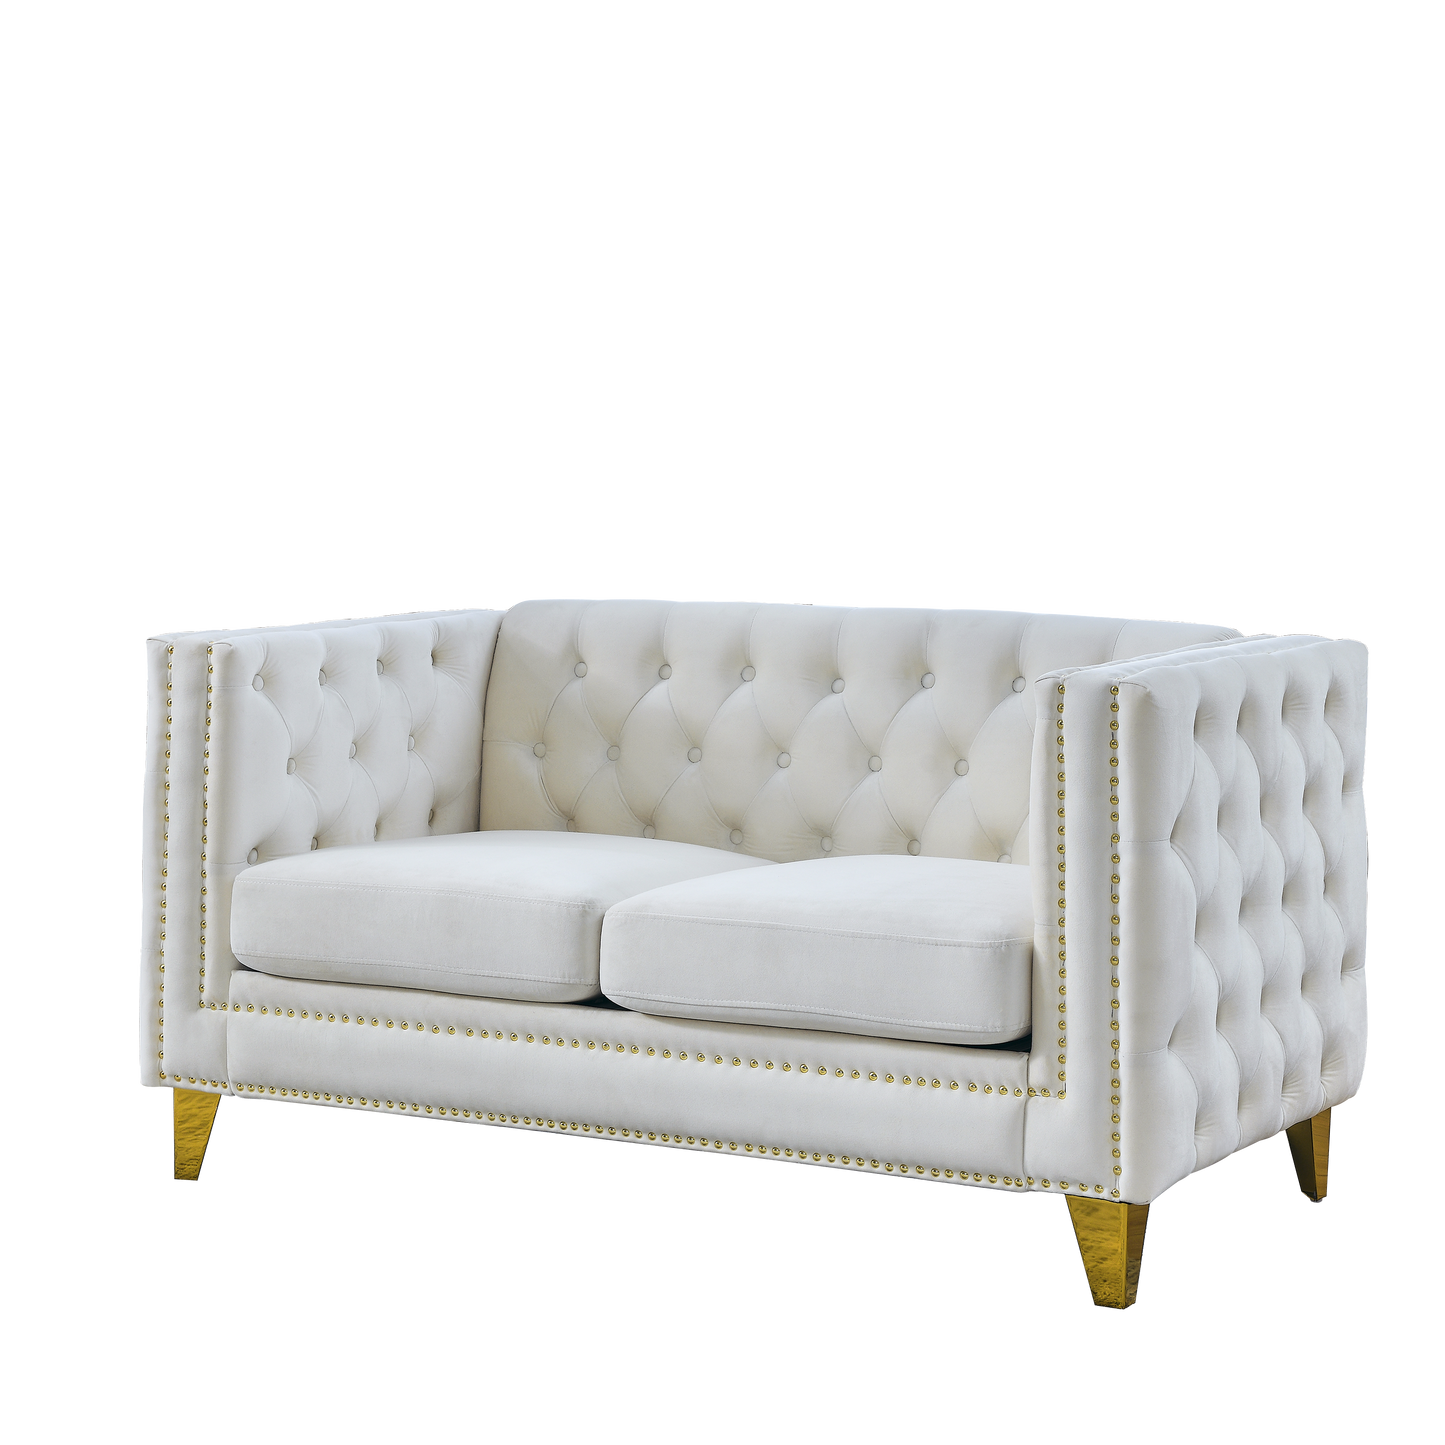 {Contact us for 3D modeling} Velvet Sofa for Living Room,Buttons Tufted Square Arm Couch, Modern Couch Upholstered Button and Metal Legs, Sofa Couch for Bedroom, Beige Velvet-2S